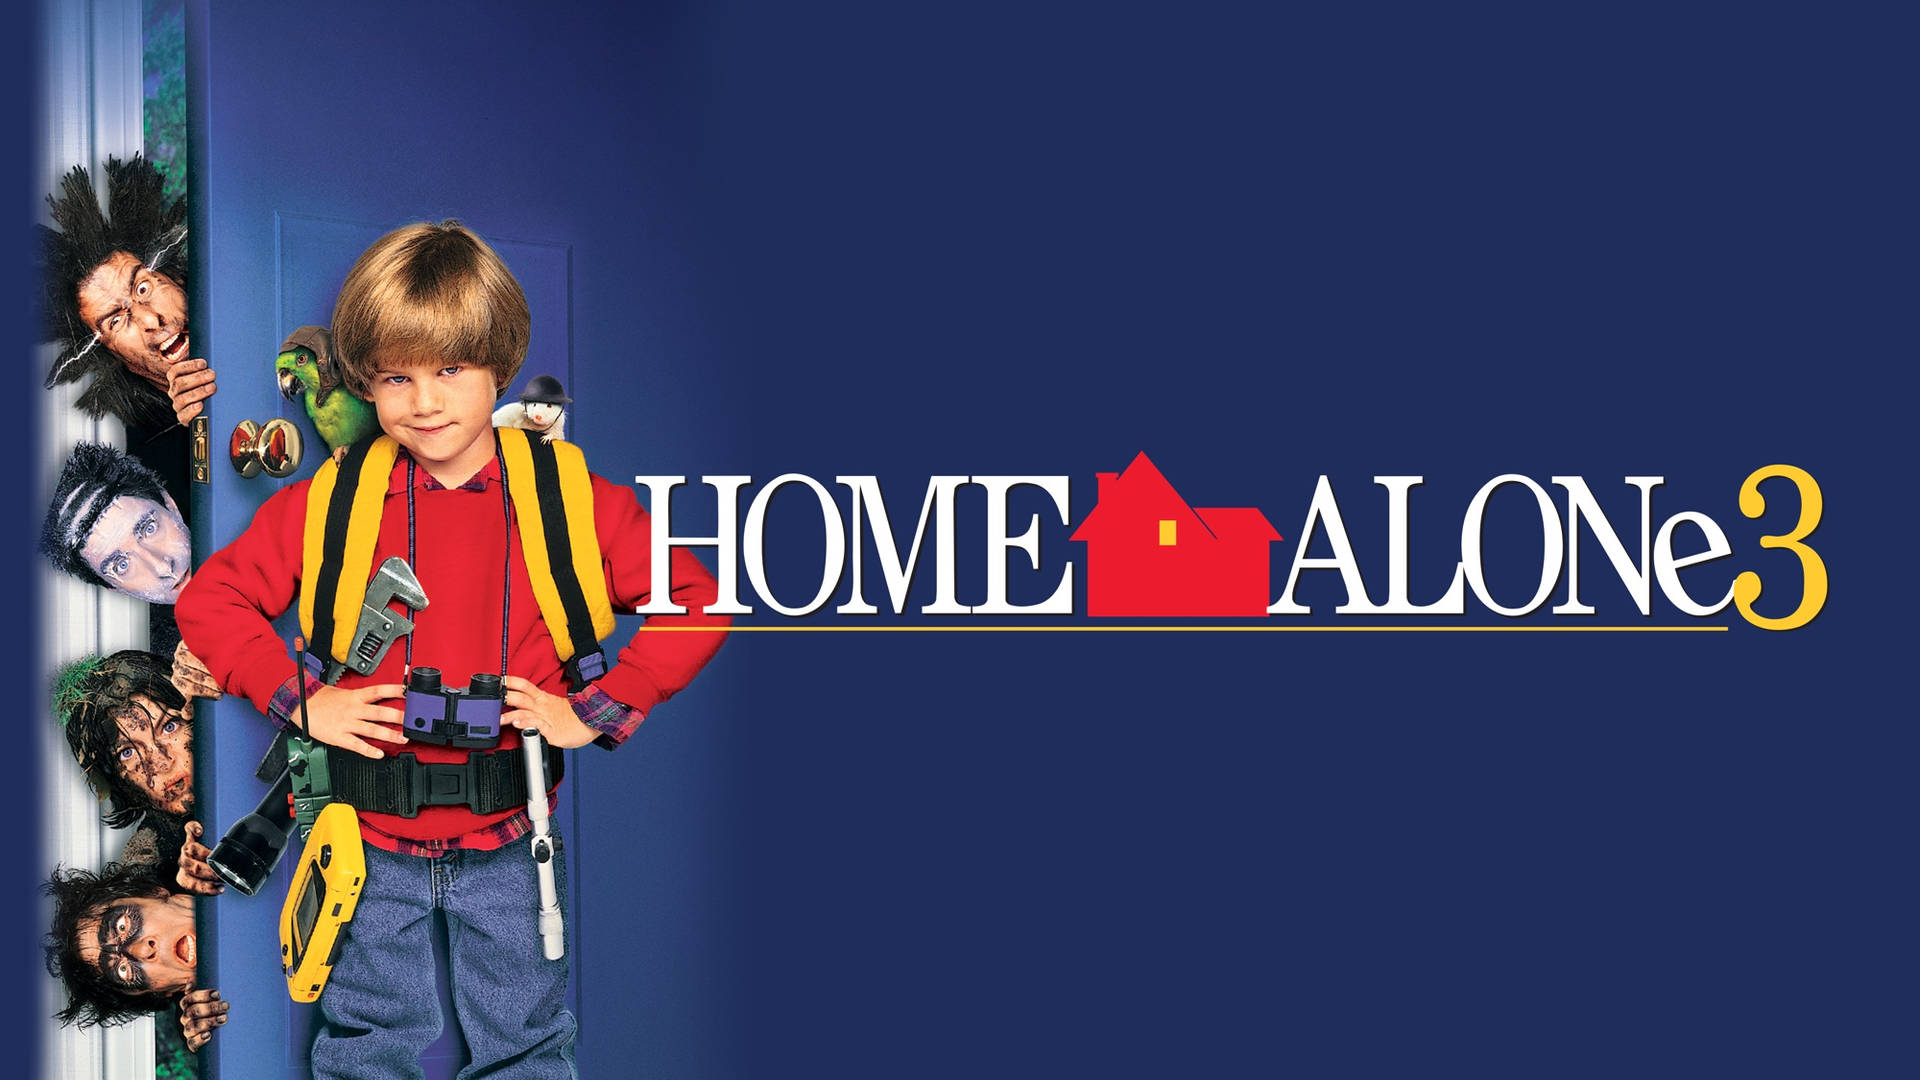 Home Alone Promotional Poster Wallpaper